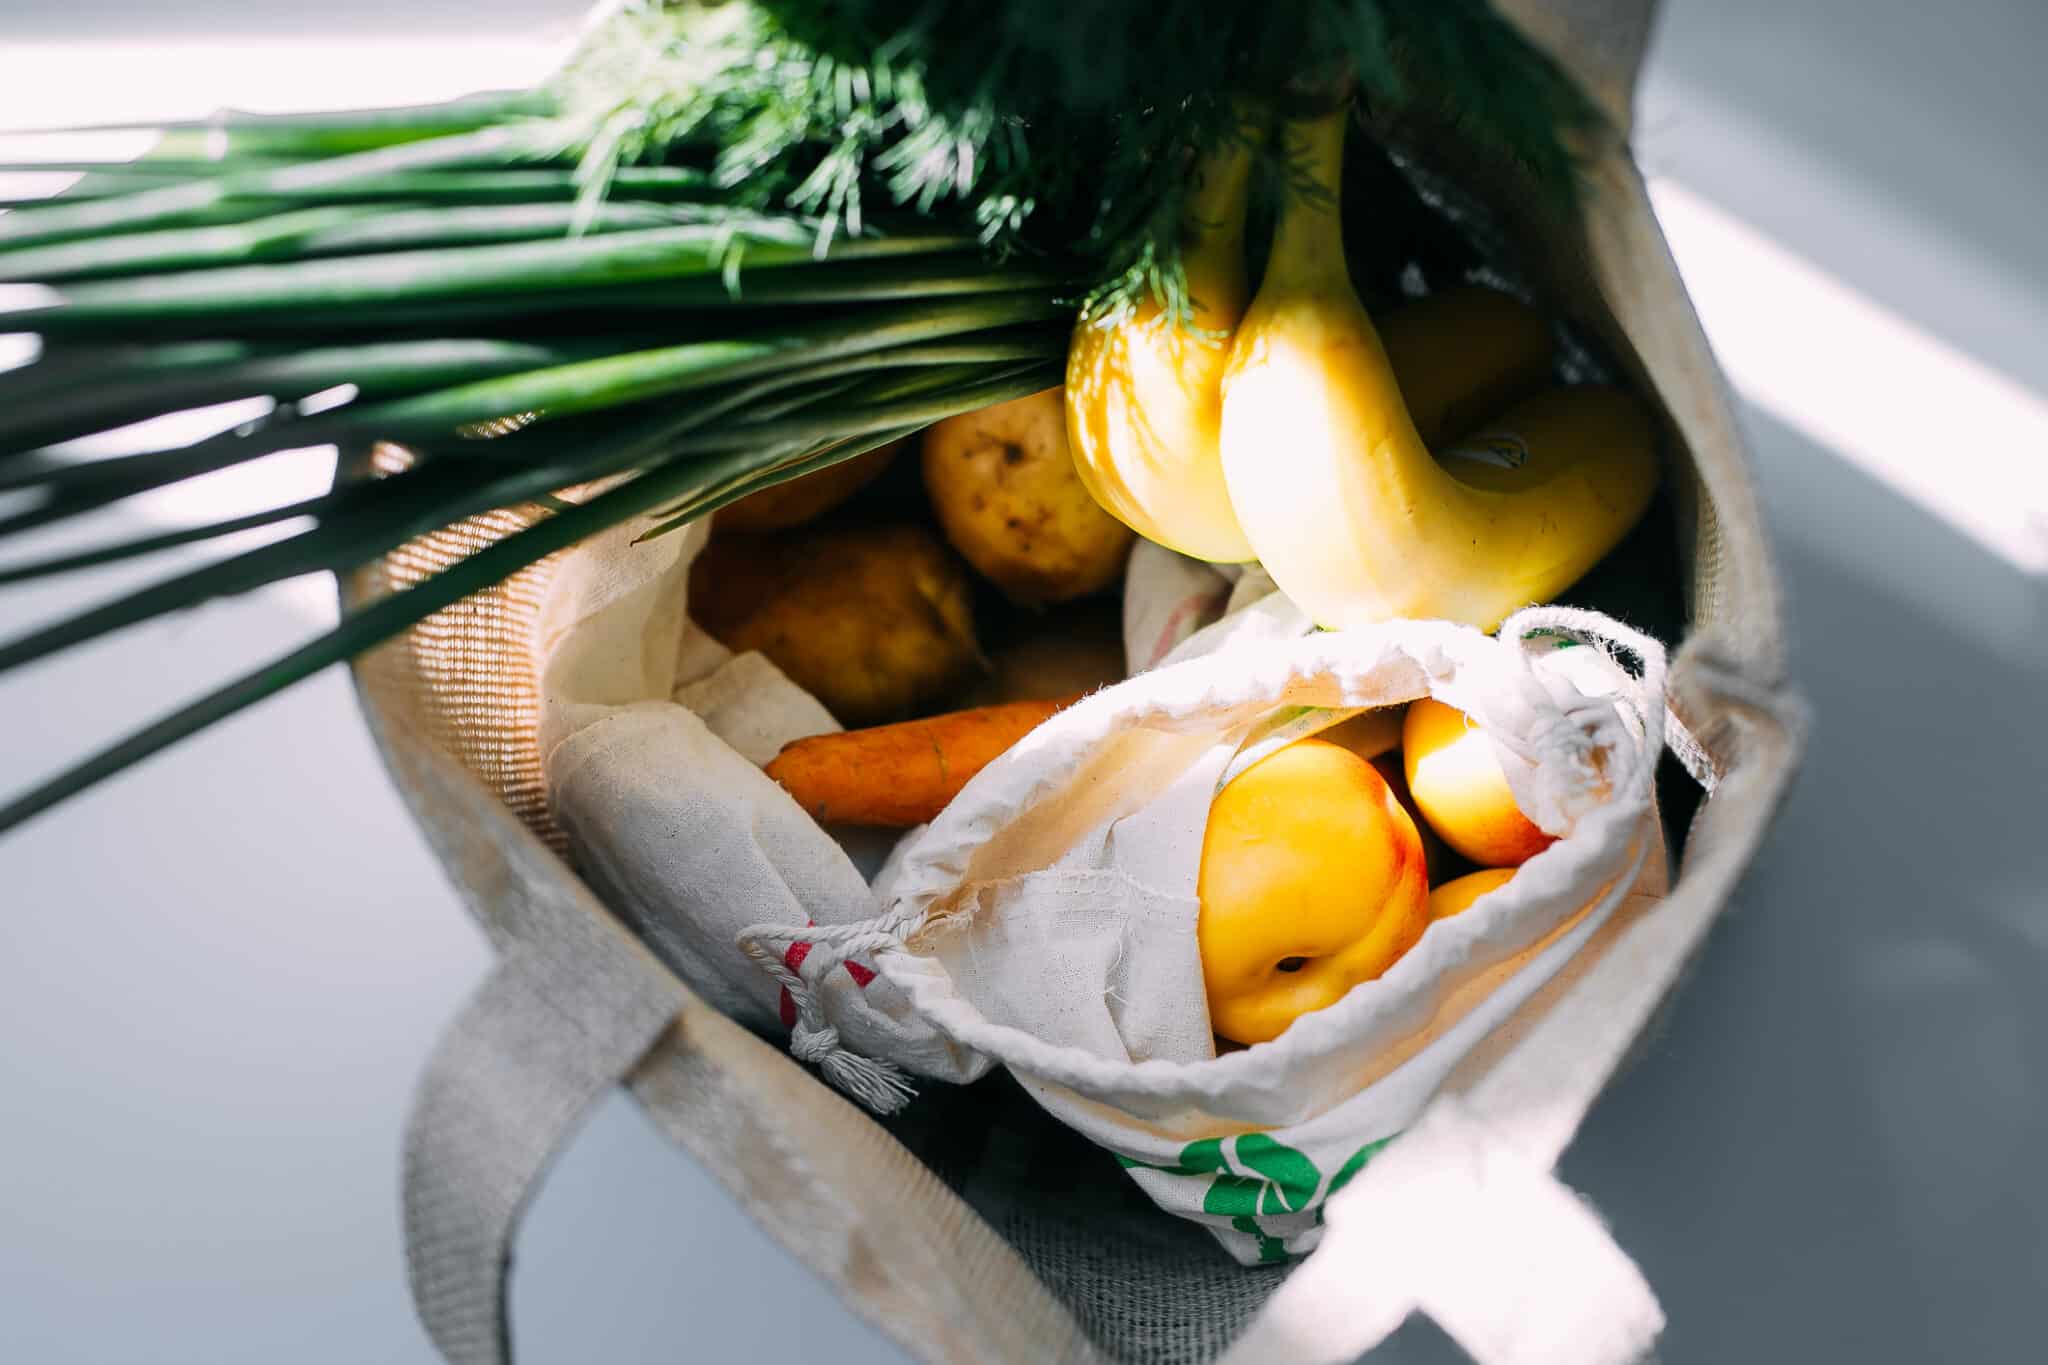 Plastic Packaging on Fresh Fruits and Vegetables Increases Food Waste,  Study Finds - EcoWatch